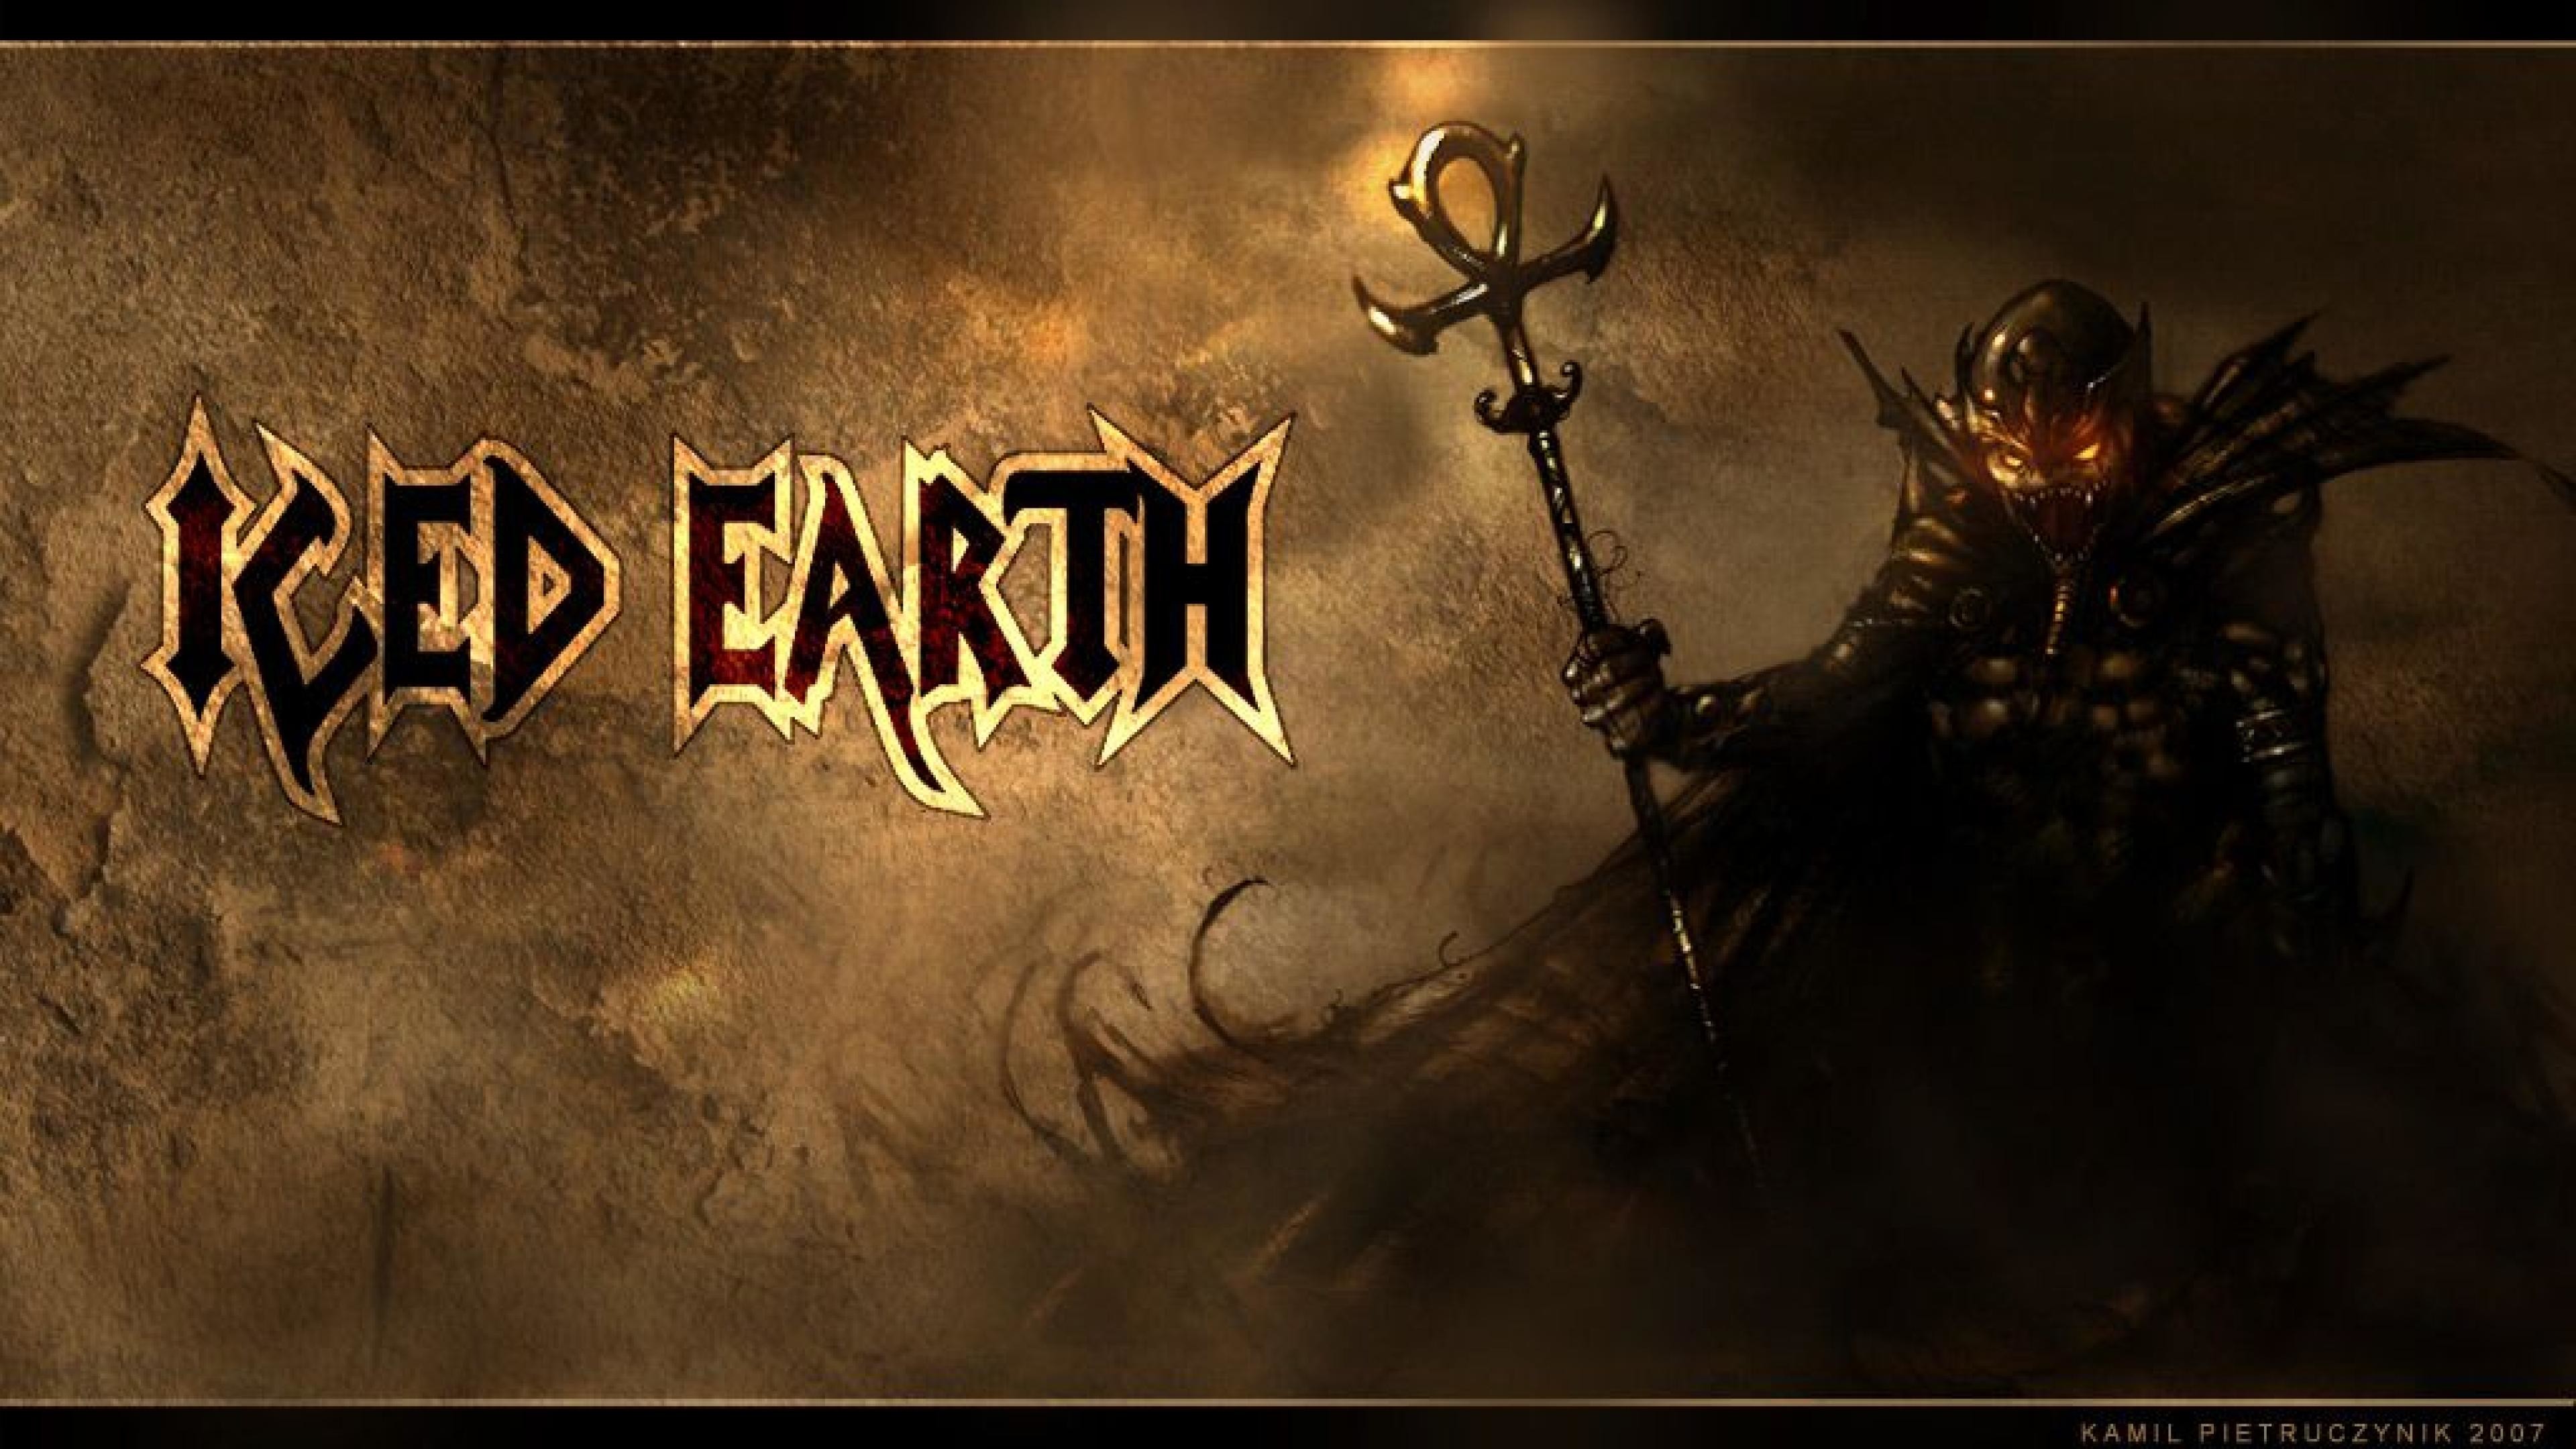 3840x2160 Images for Desktop: Iced Earth